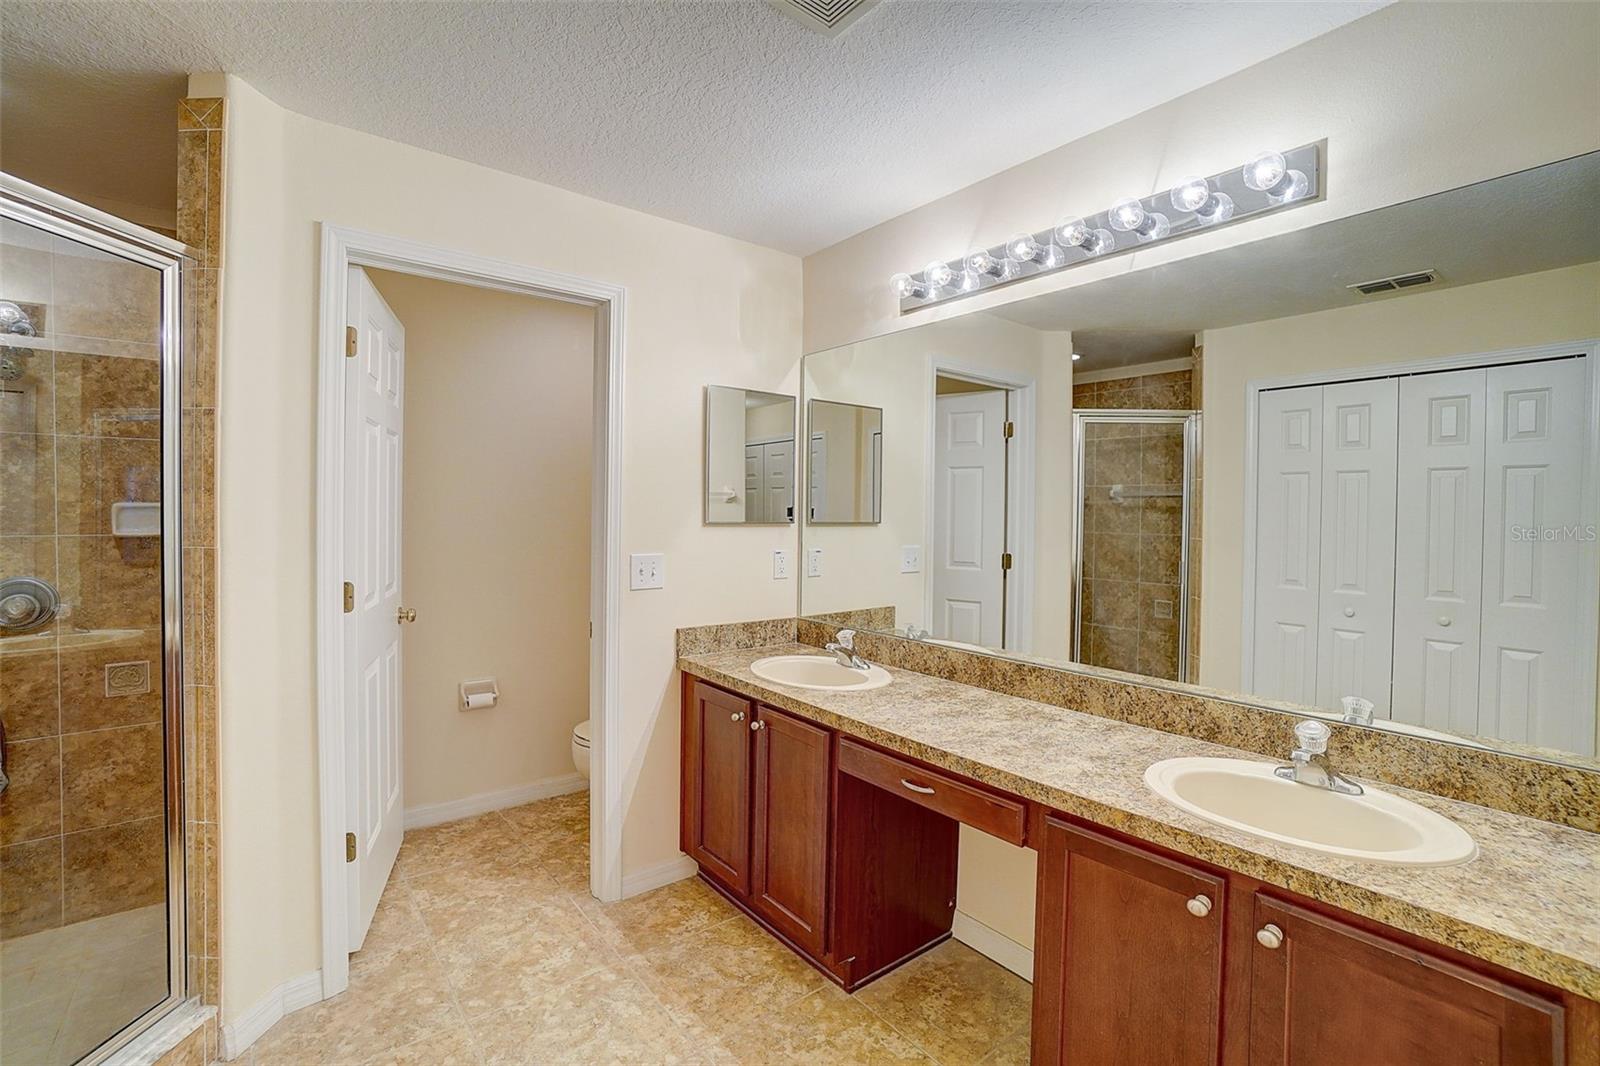 En-suite bathroom has separate shower and "water closet" along with dual sinks and lots of cabinet space.